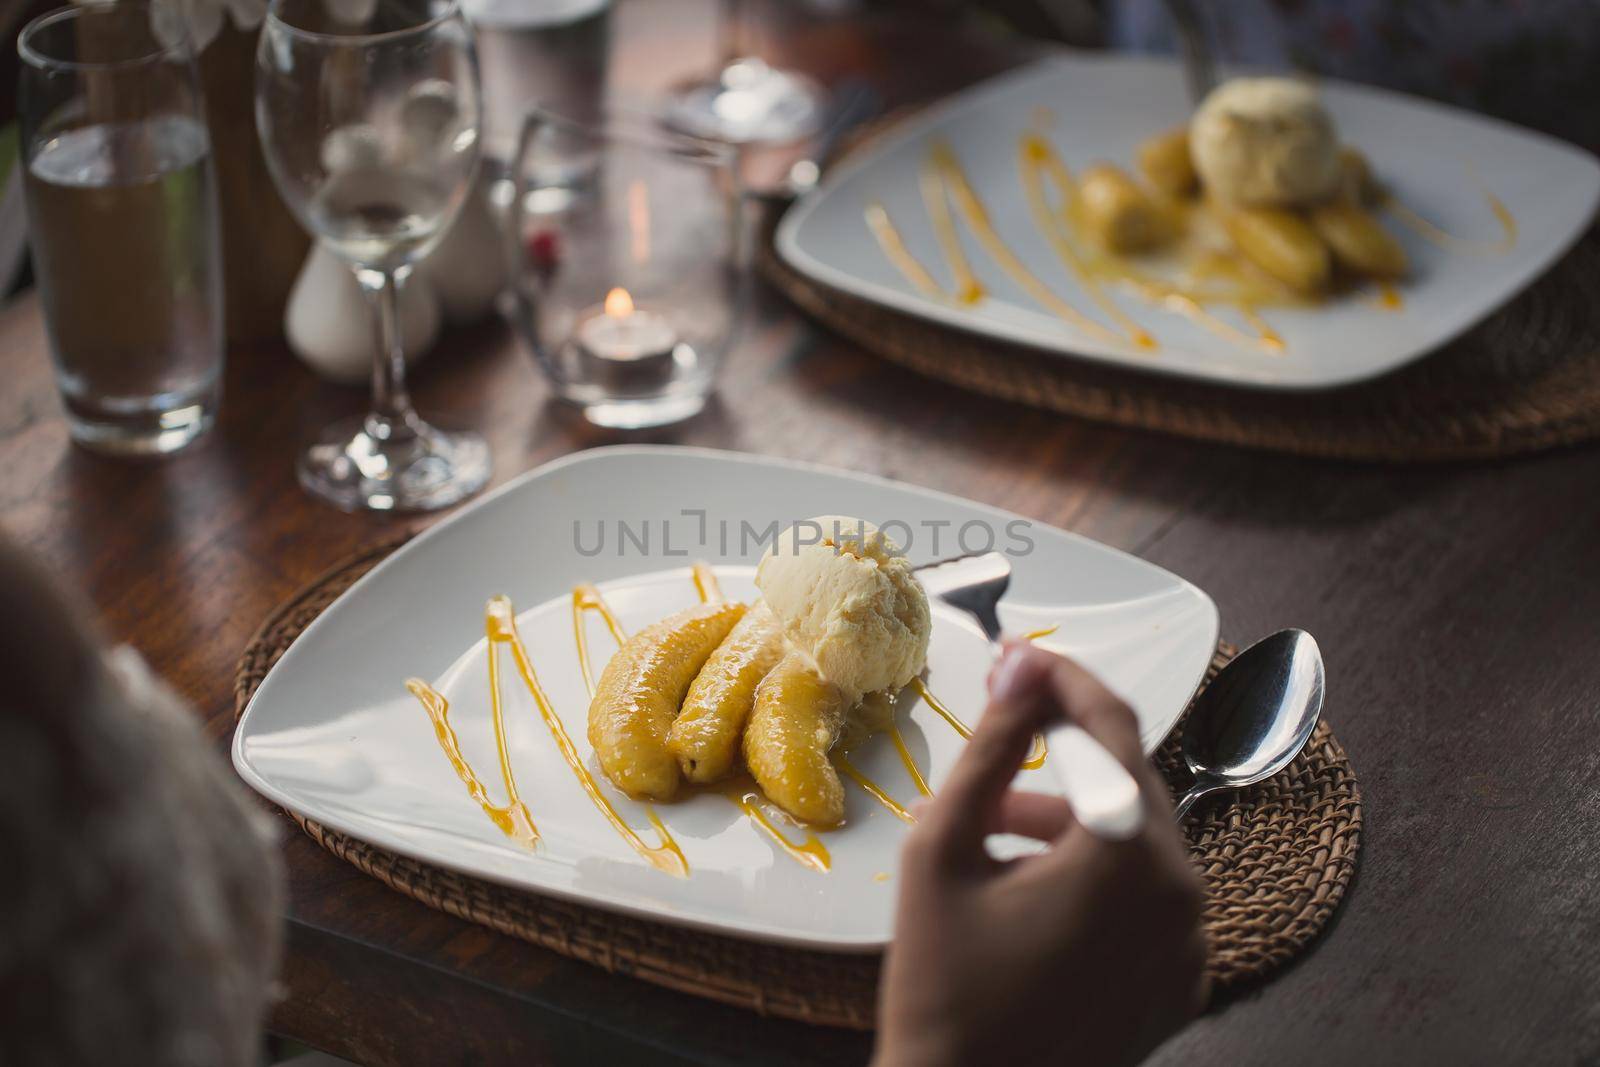 Fried banana and ice cream on a plate by StudioPeace